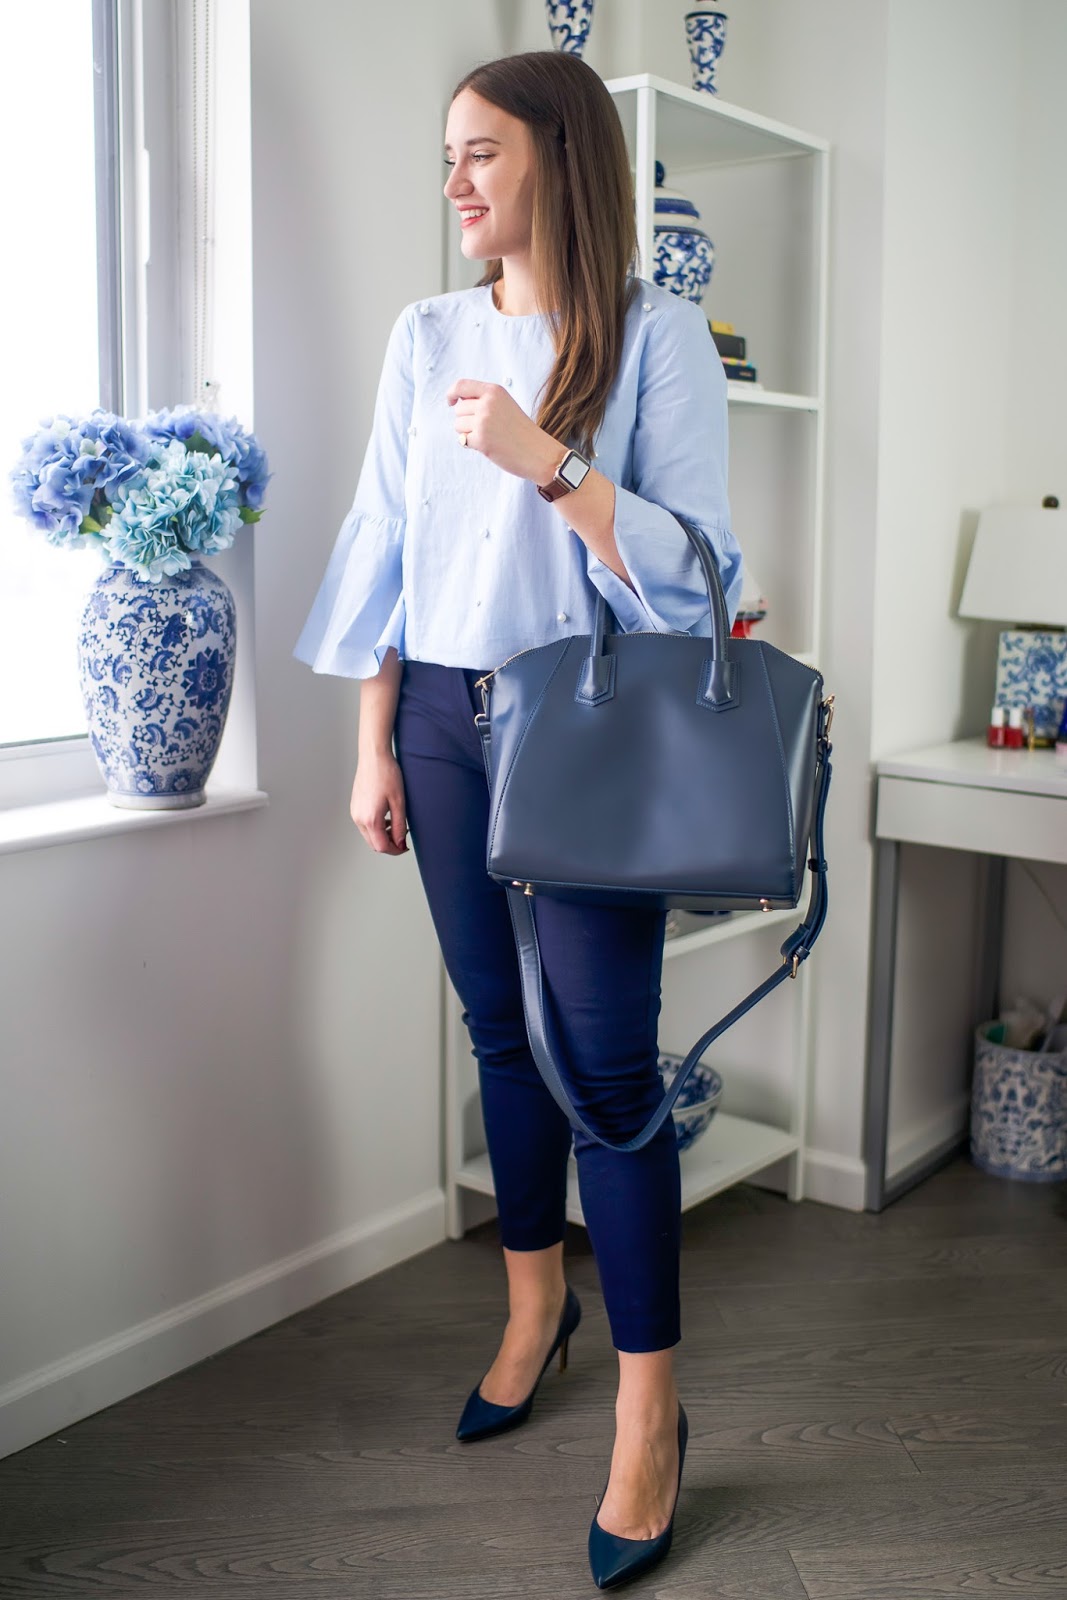 Affordable Clothing for Work Look by popular New York fashion blogger Covering the Bases